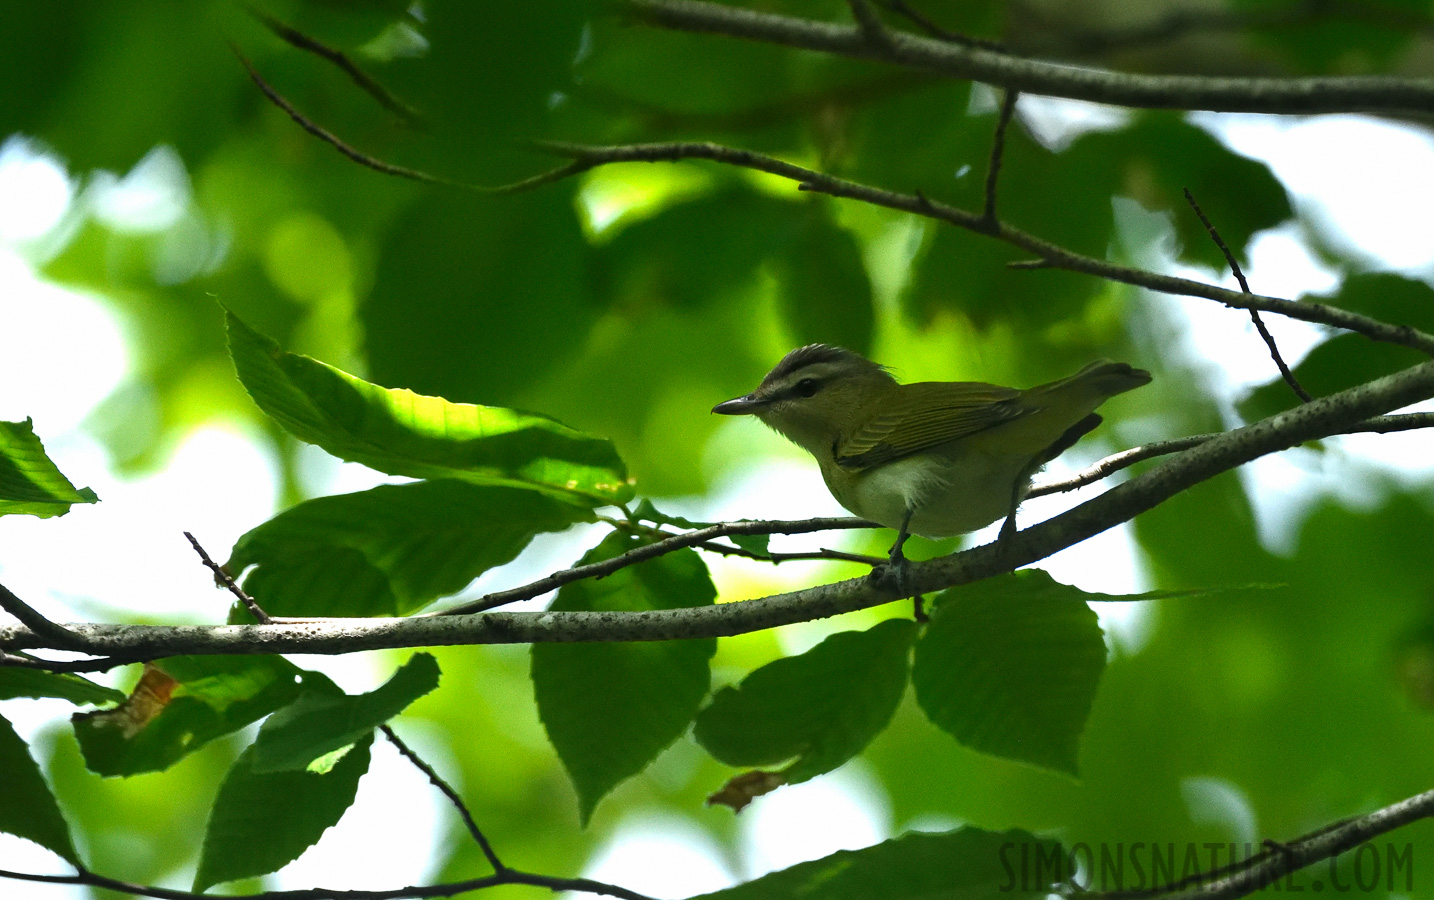 Vireo olivaceus [400 mm, 1/1250 sec at f / 7.1, ISO 1600]